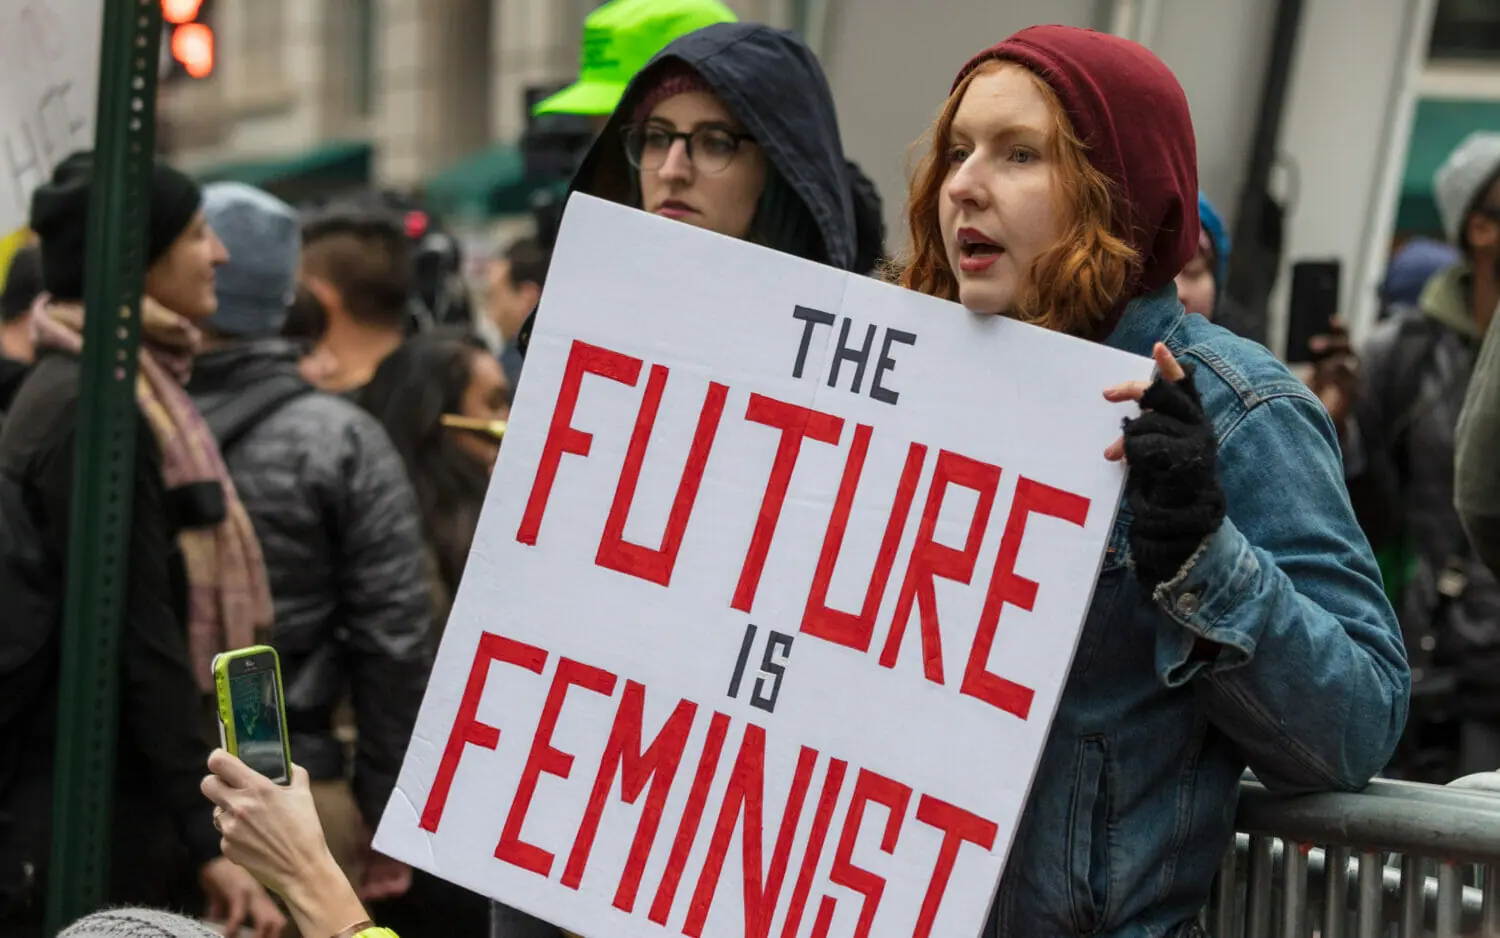 In this image: A woman holds a sign at a rally that says 